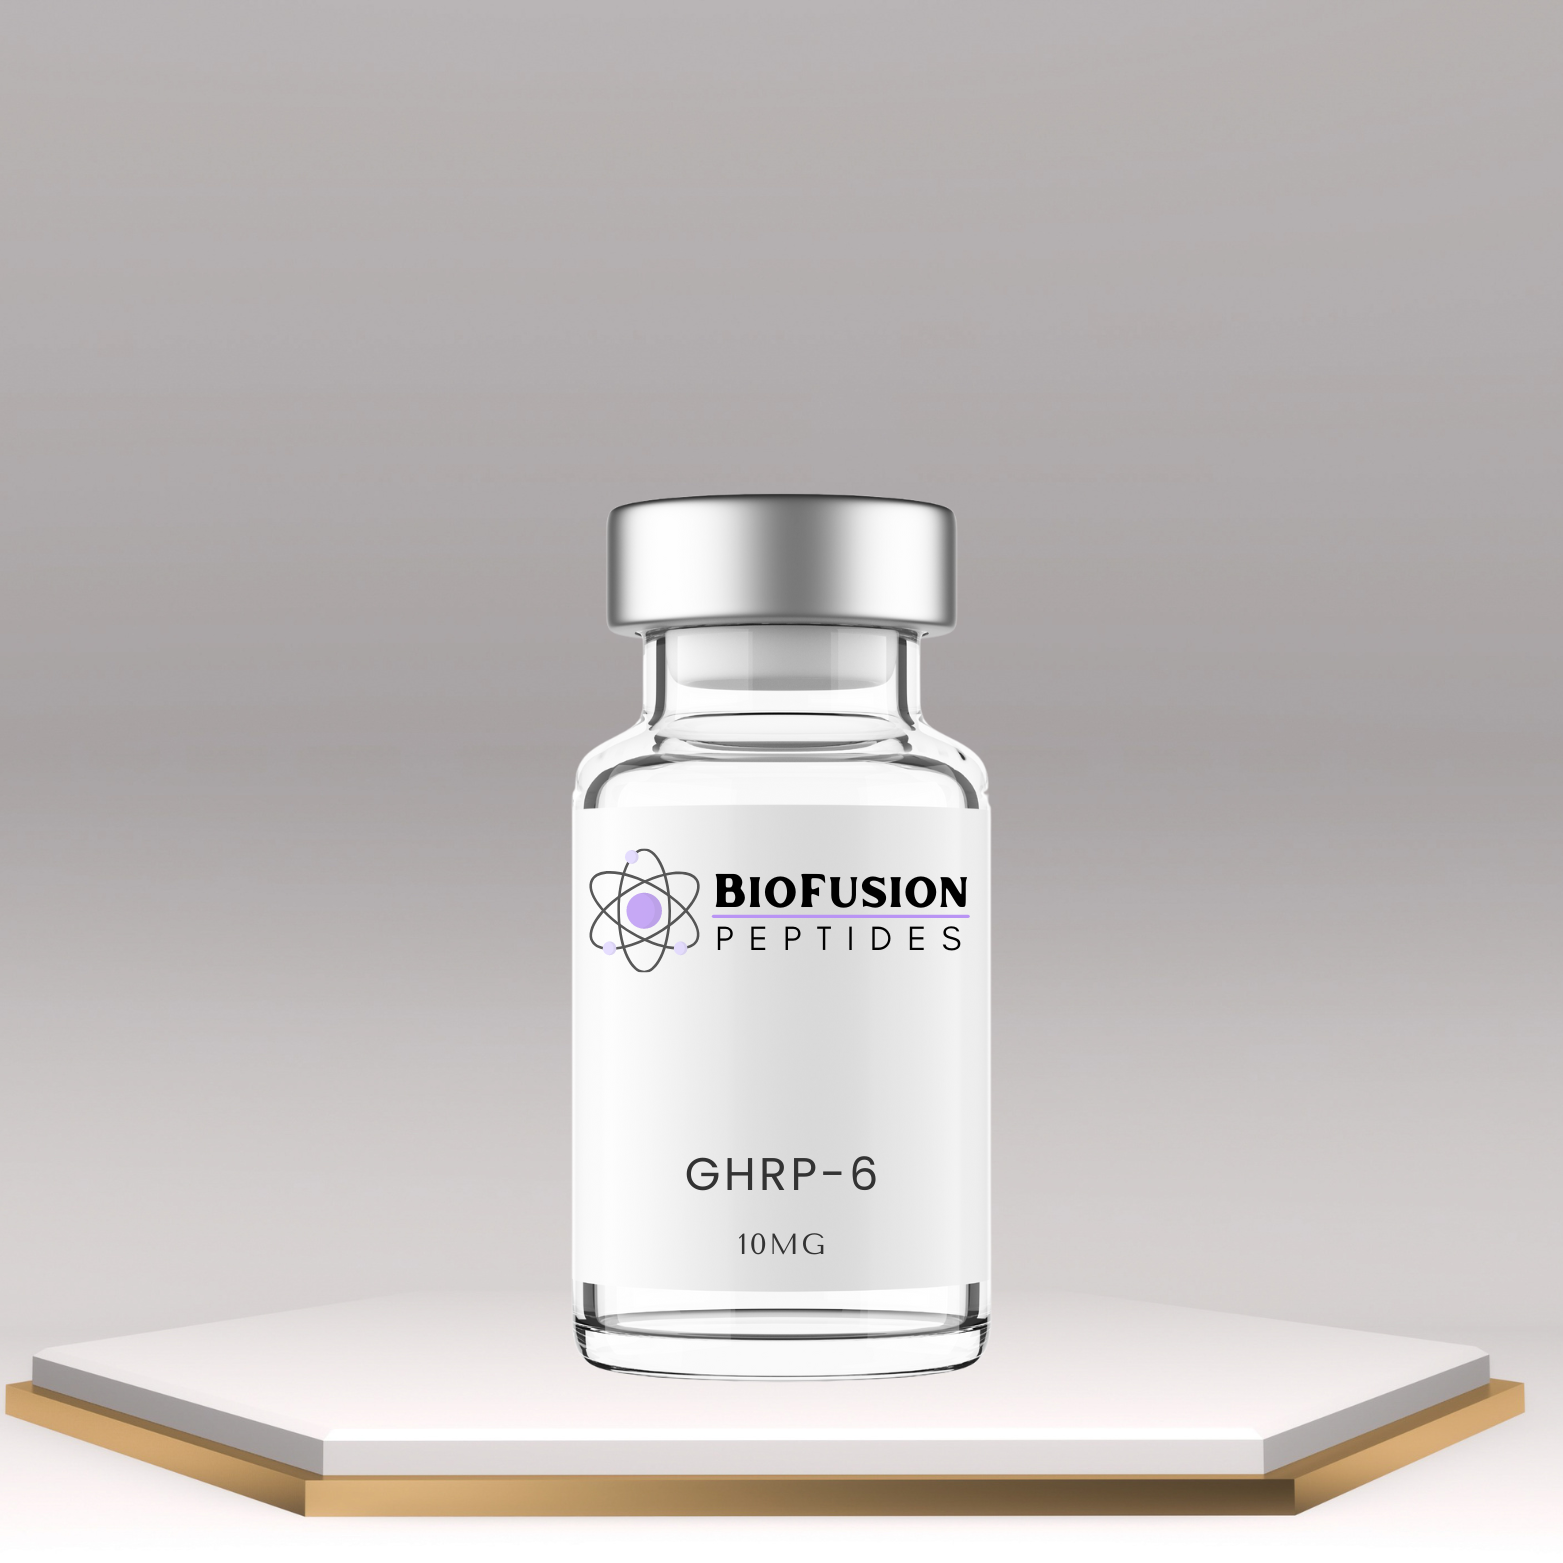 BioFusion Peptides GHRP-6 10MG vial